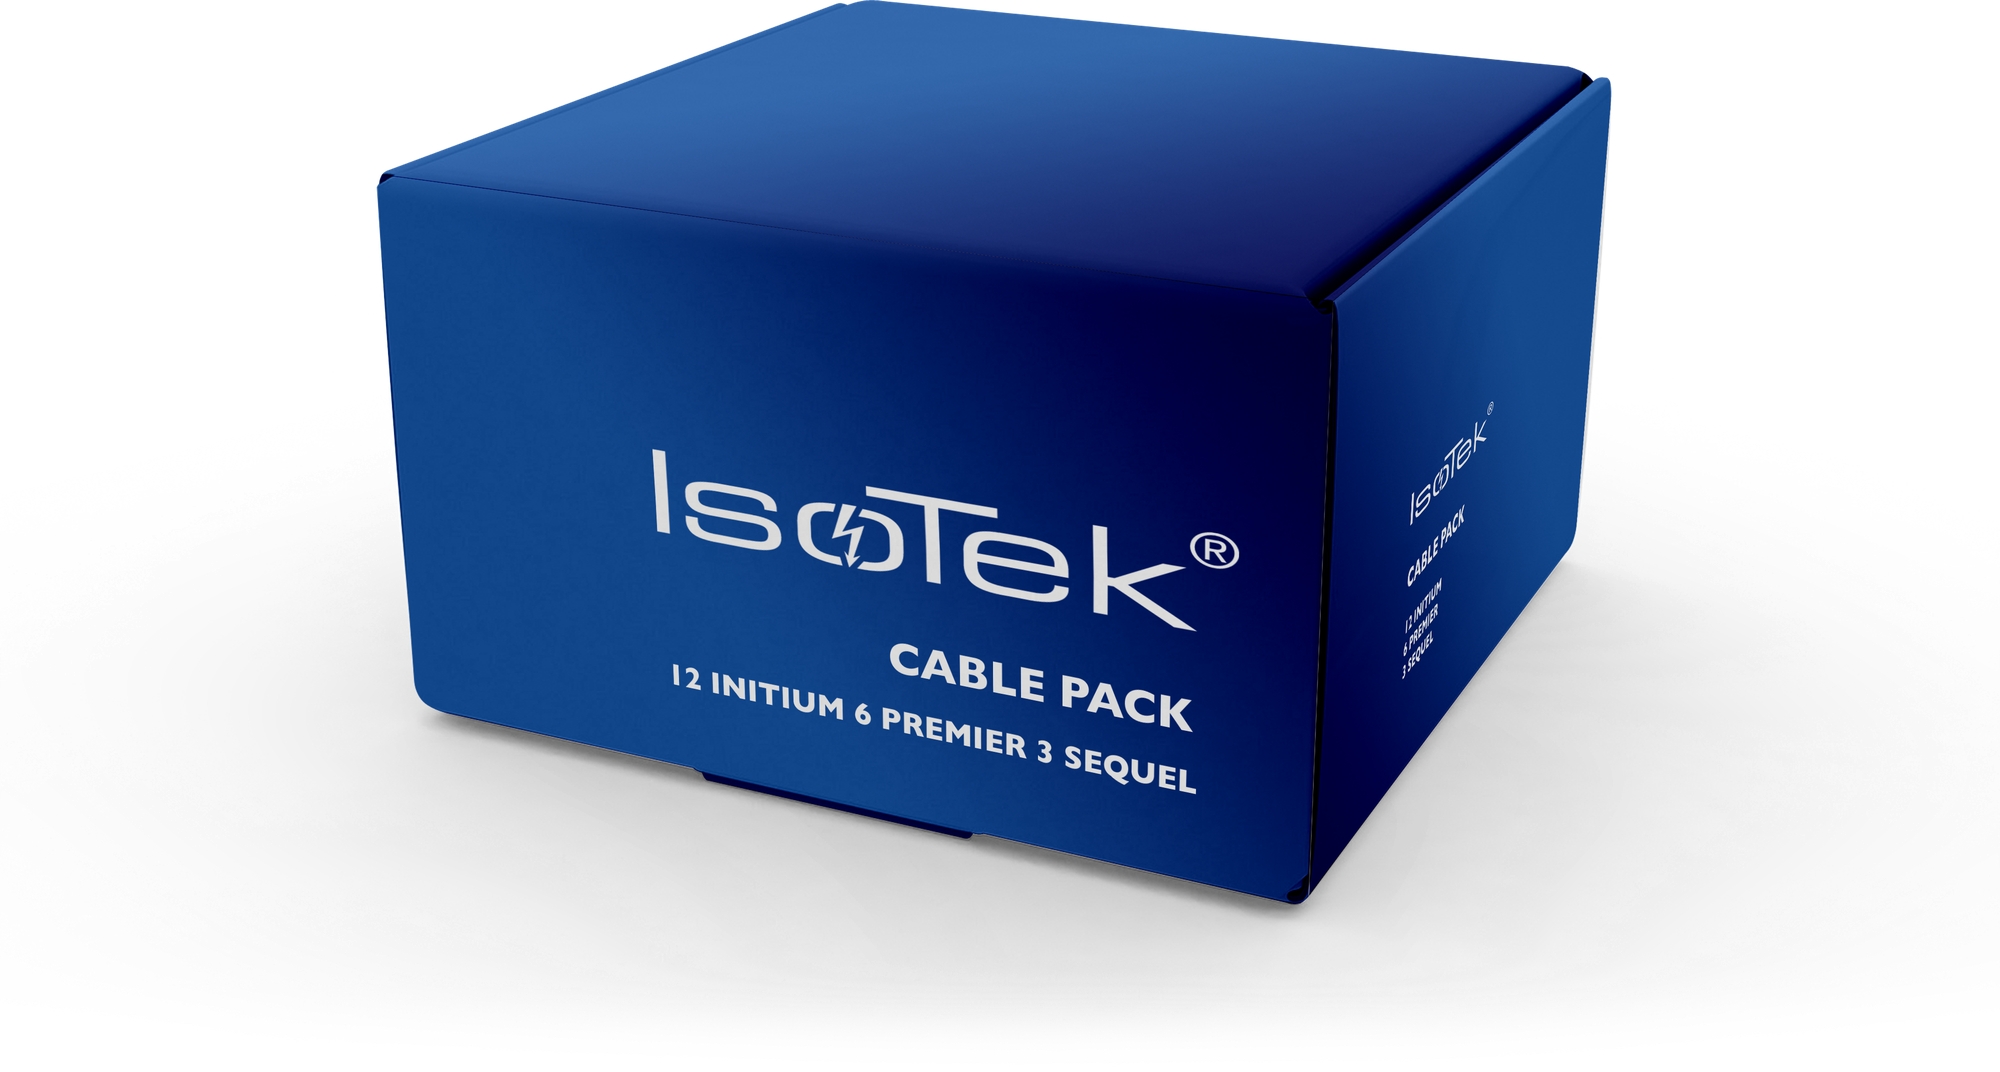 IsoTek Cable Pack